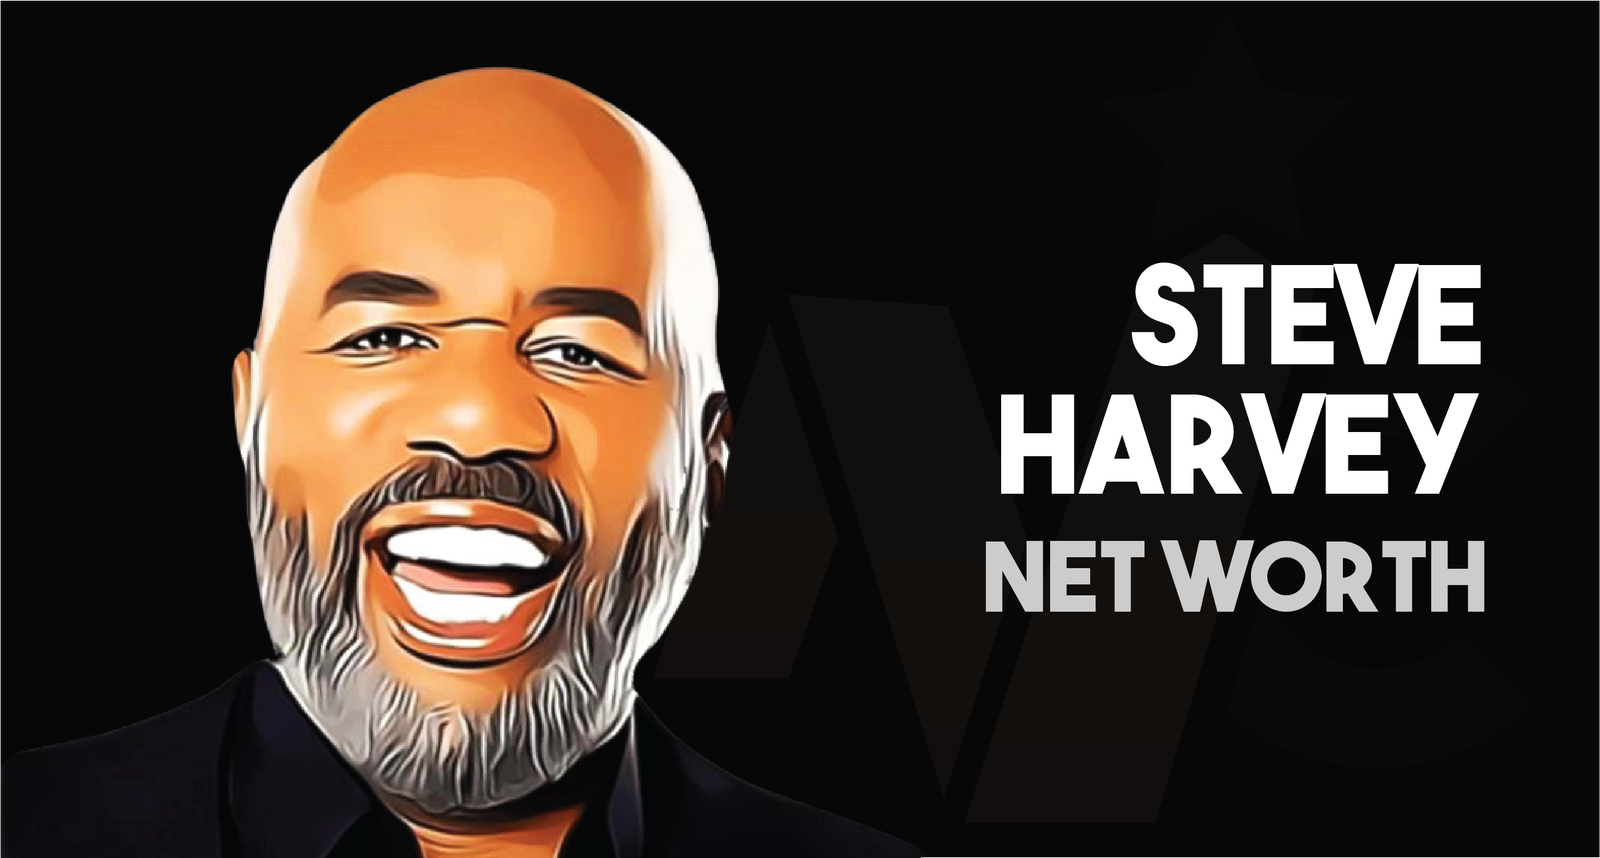 We’re Blown Away by ‘The Steve Harvey Morning Show’ Host’s Net Worth